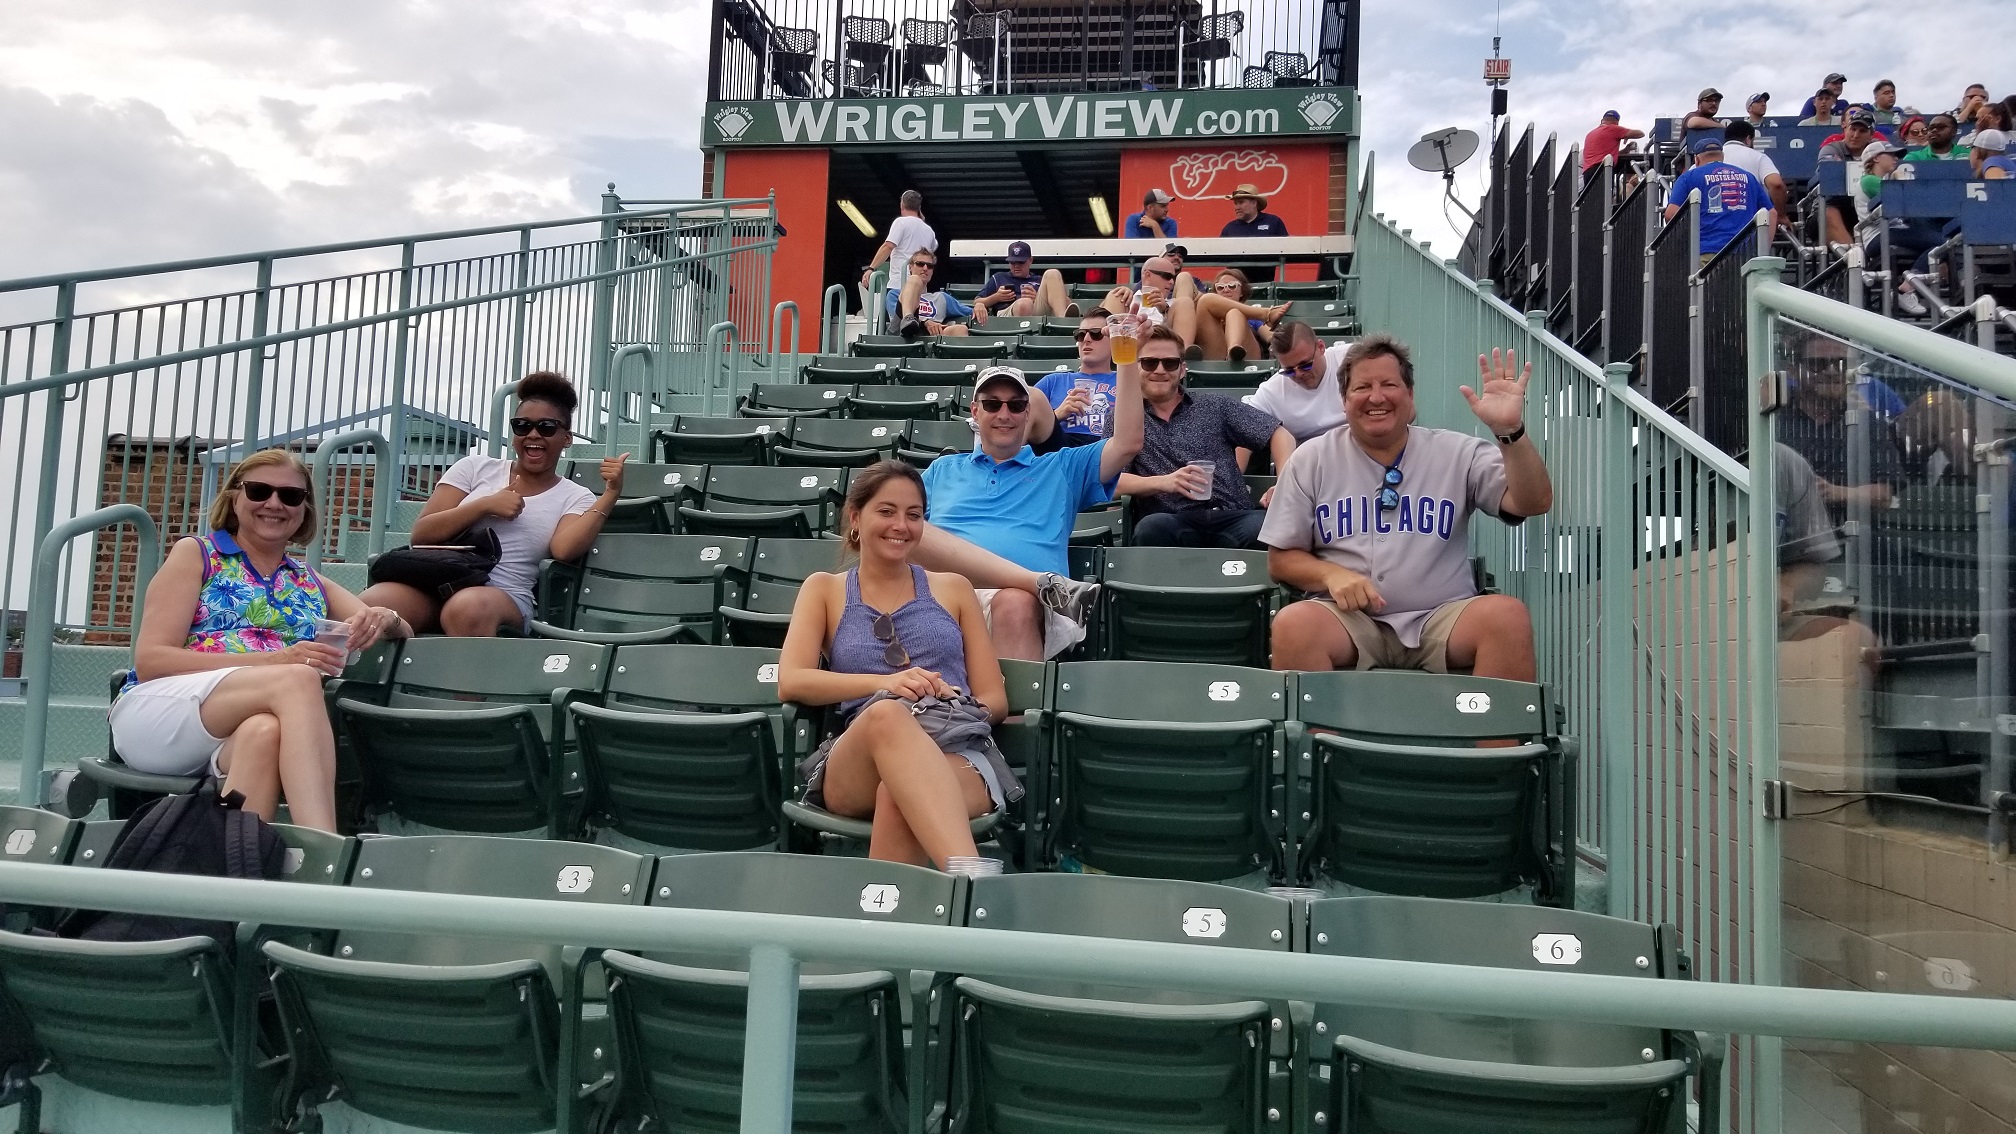 IMC enjoyed a beautiful day at Wrigley Field, watching the Cubs play during a 2019 summer group outing. 